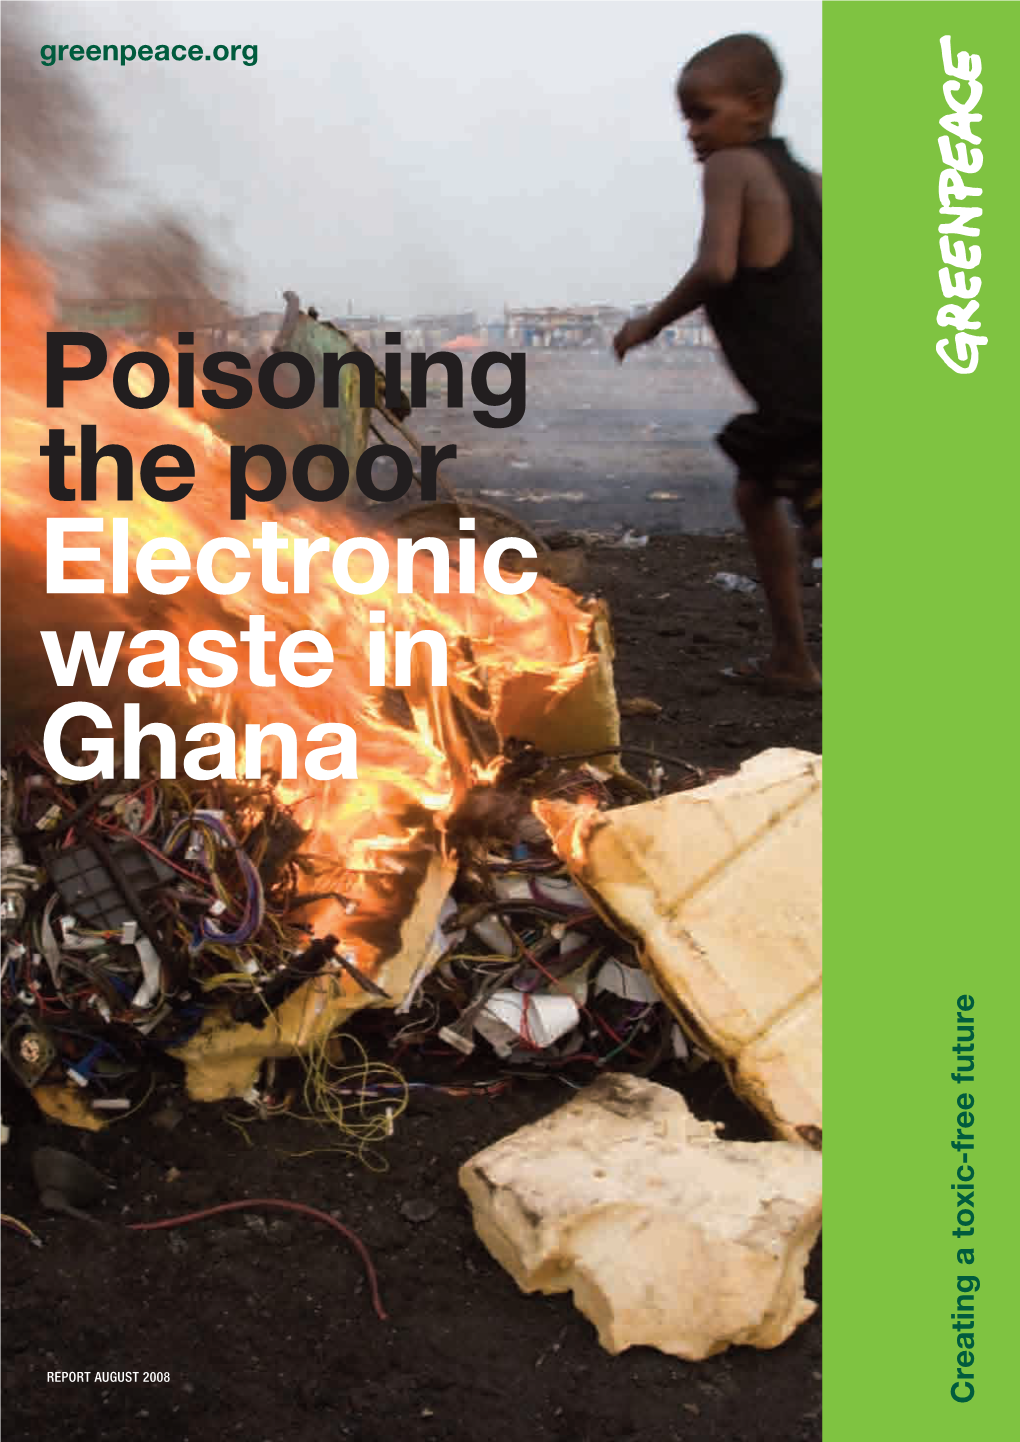 Poisoning the Poor Electronic Waste in Ghana